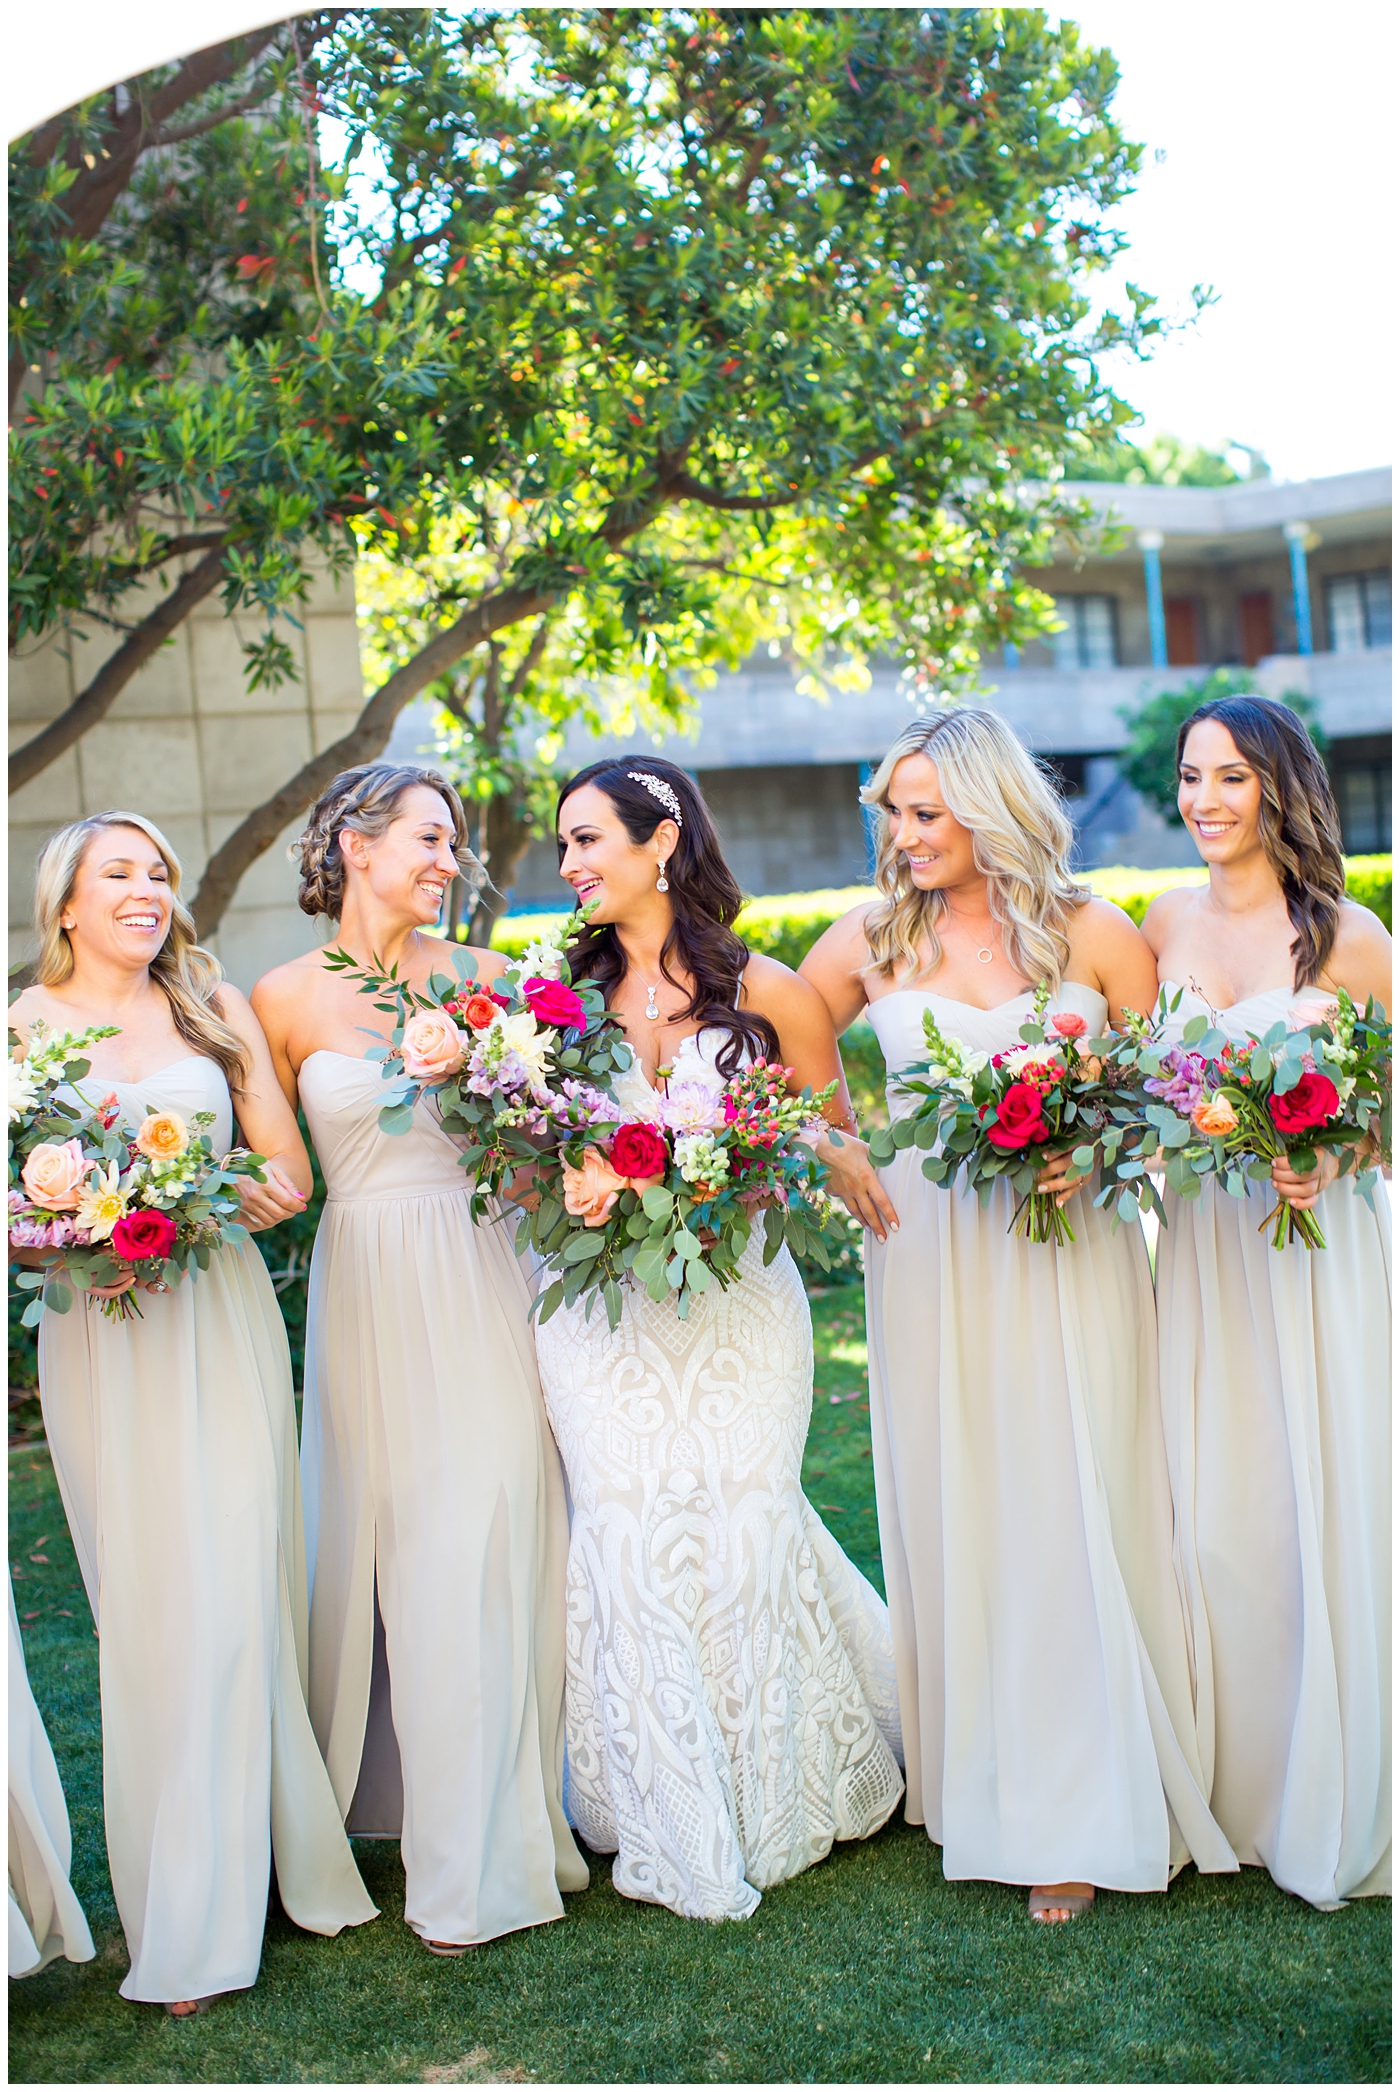 brunette bride in wedding dress with thin straps with bright color roses, dahlia, snap dragons loose bouquet with bridesmaids in champagne long dresses wedding day bridal party portrait 